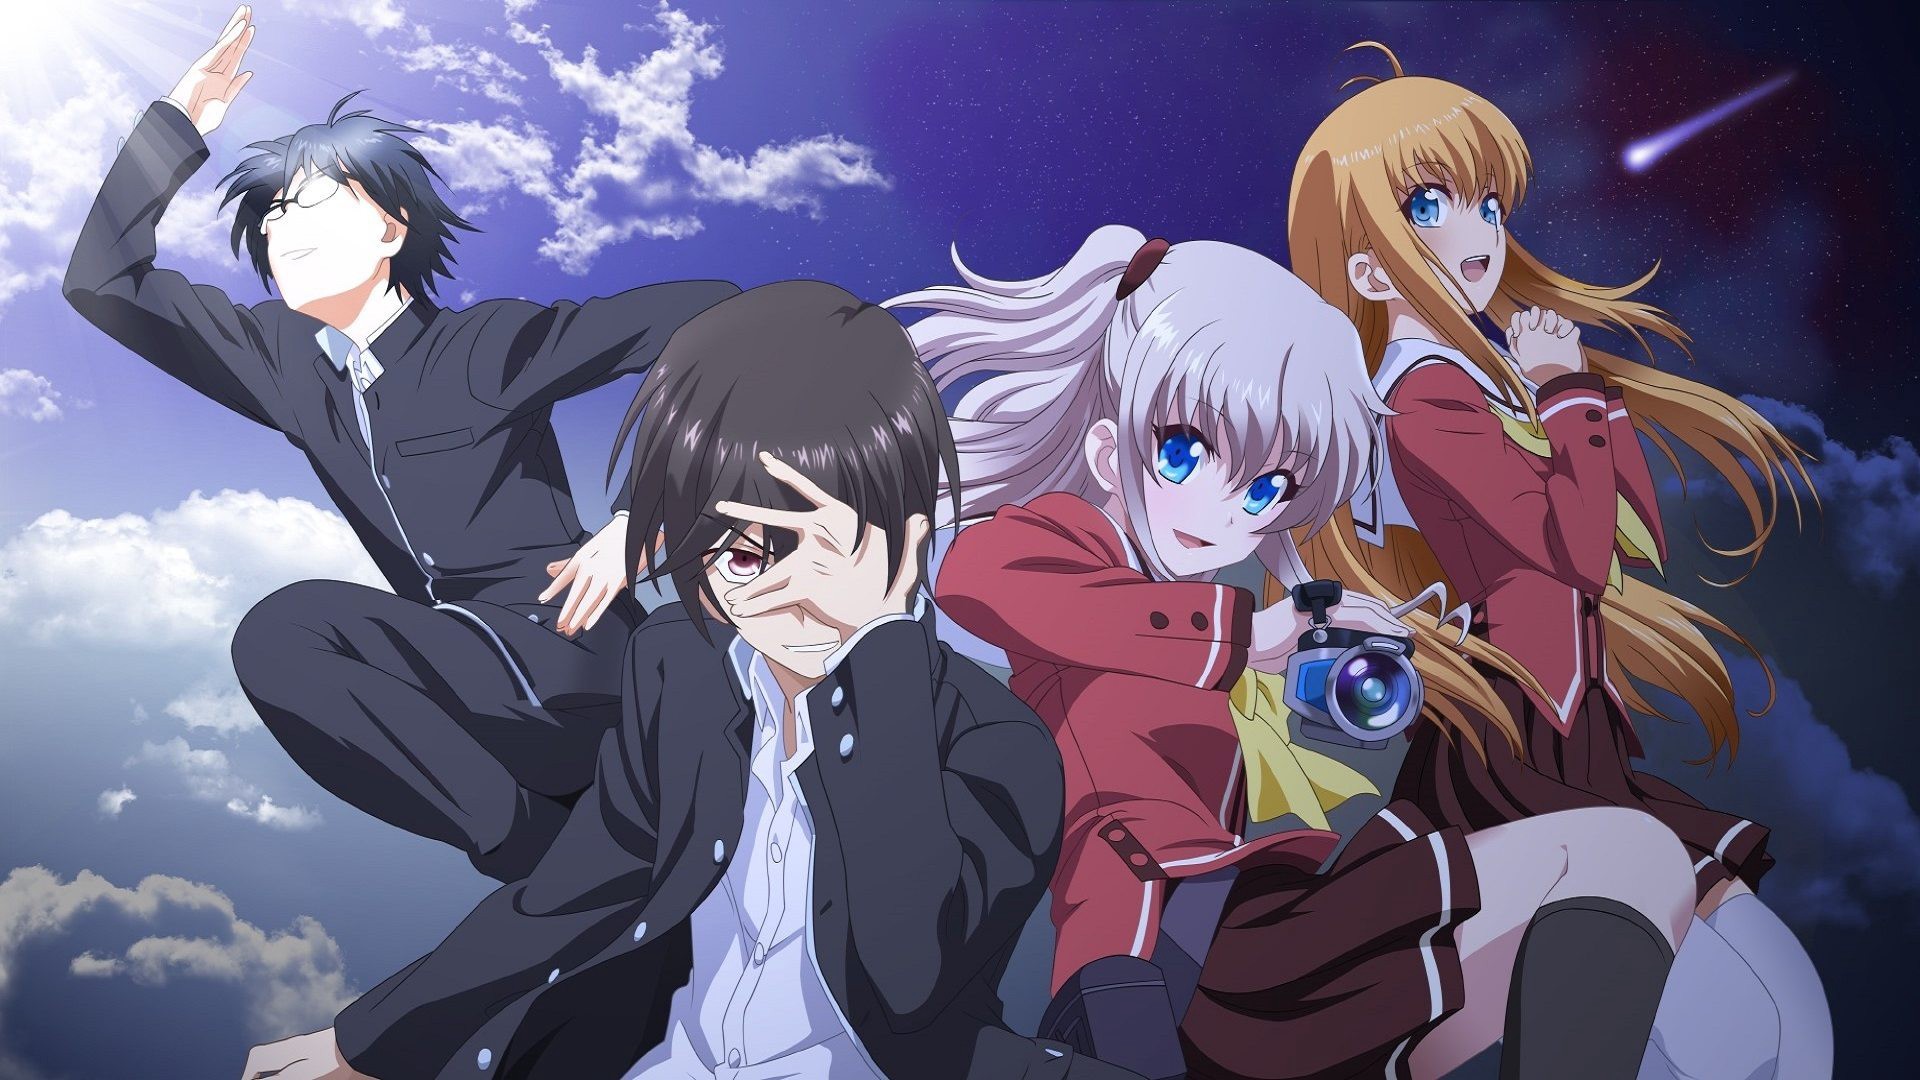 Charlotte Anime Review: Is Charlotte Worth Watching?